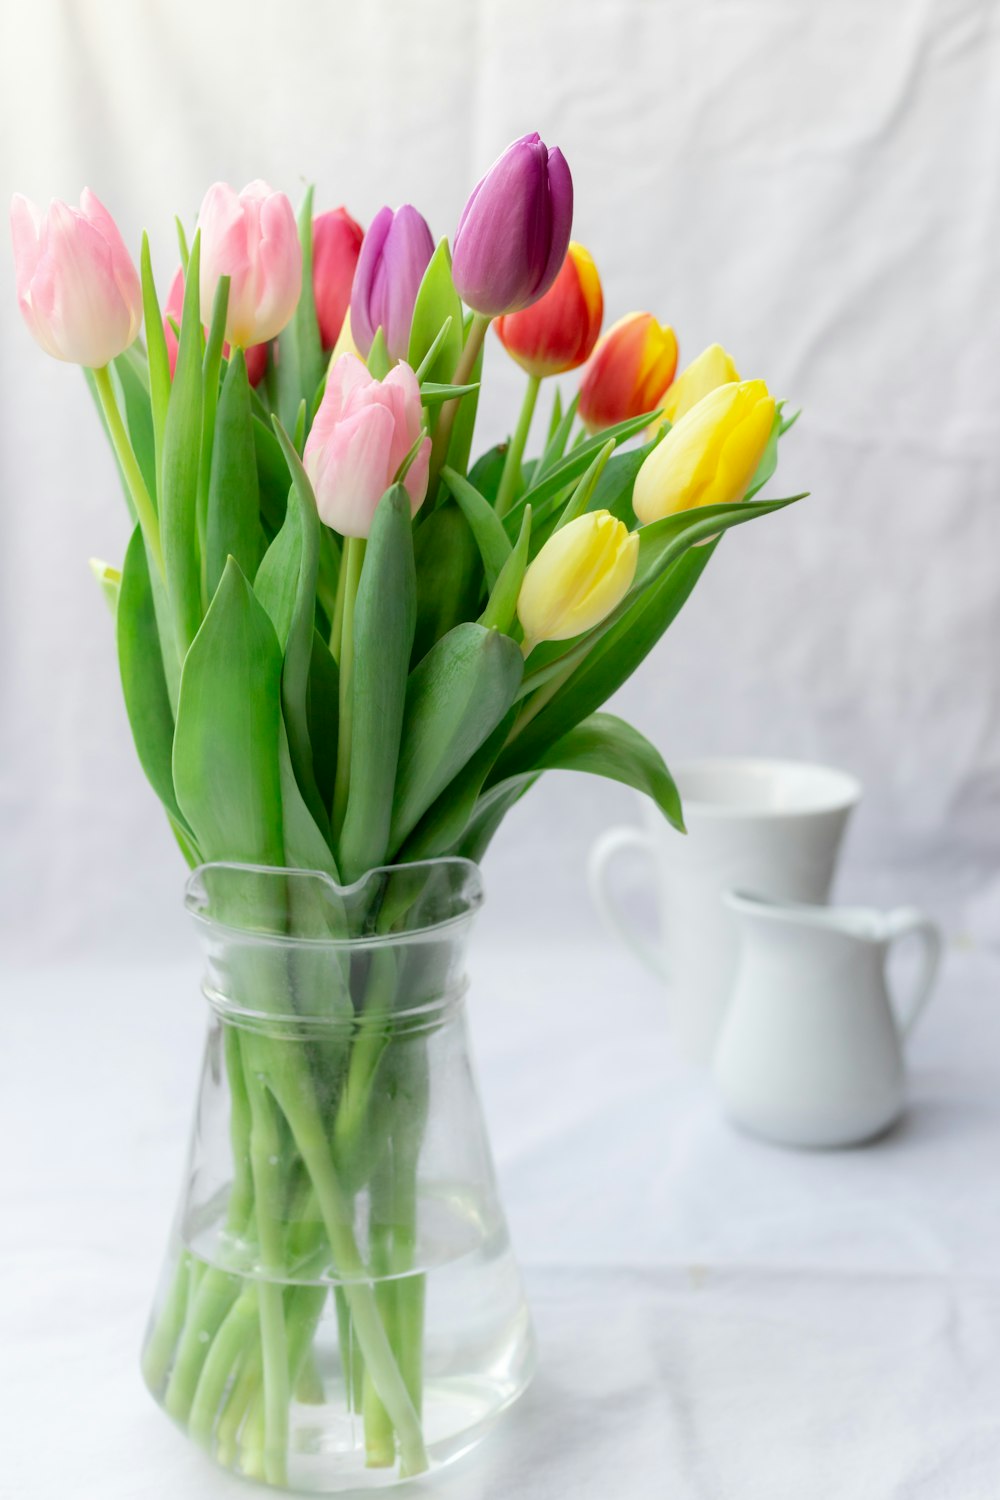 pink and yellow tulips in clear glass vase